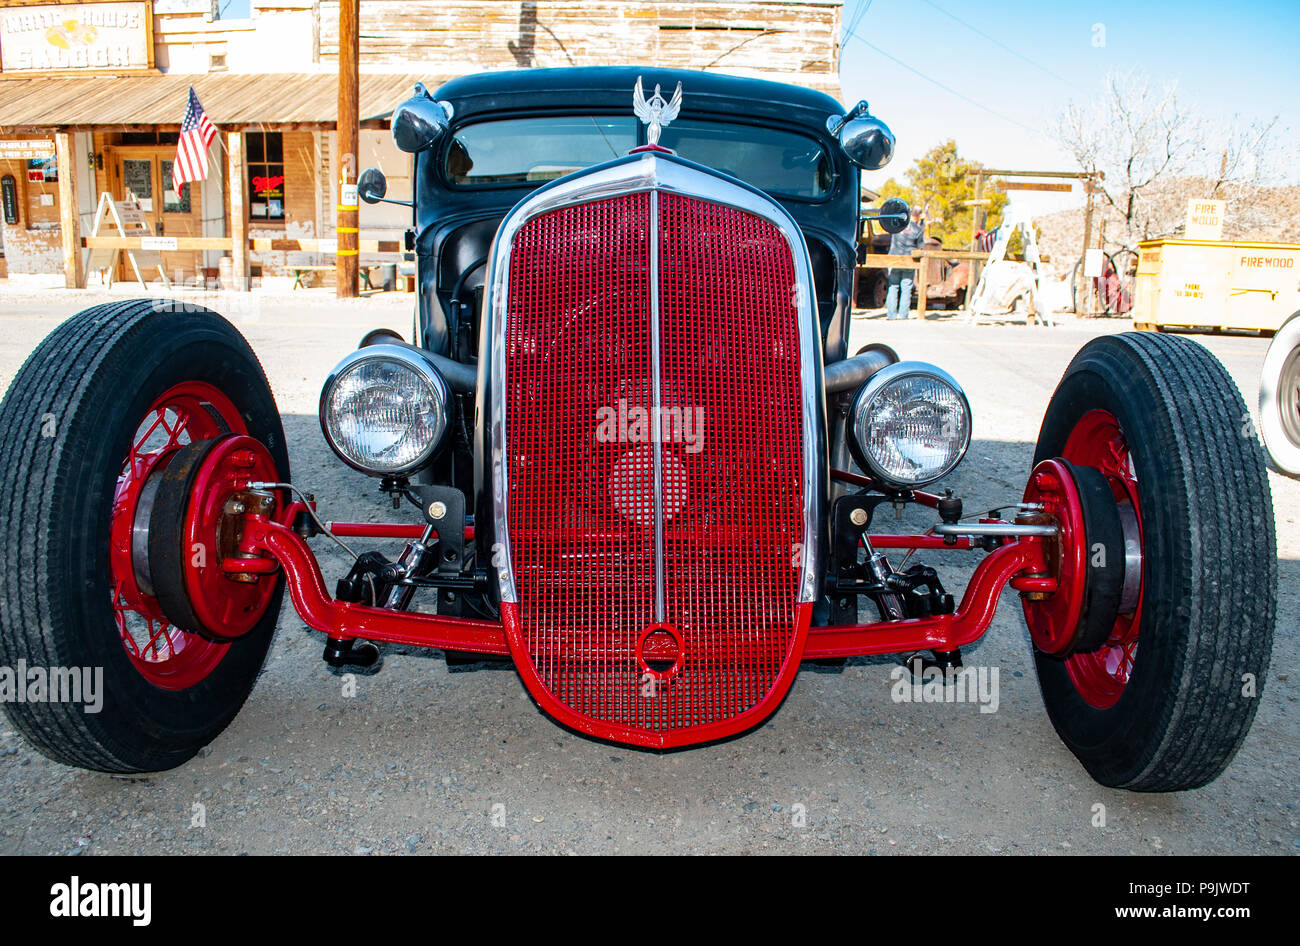 hot rod in red and black in an old ghost town with big white wall tires and a custom red wire grill Stock Photo